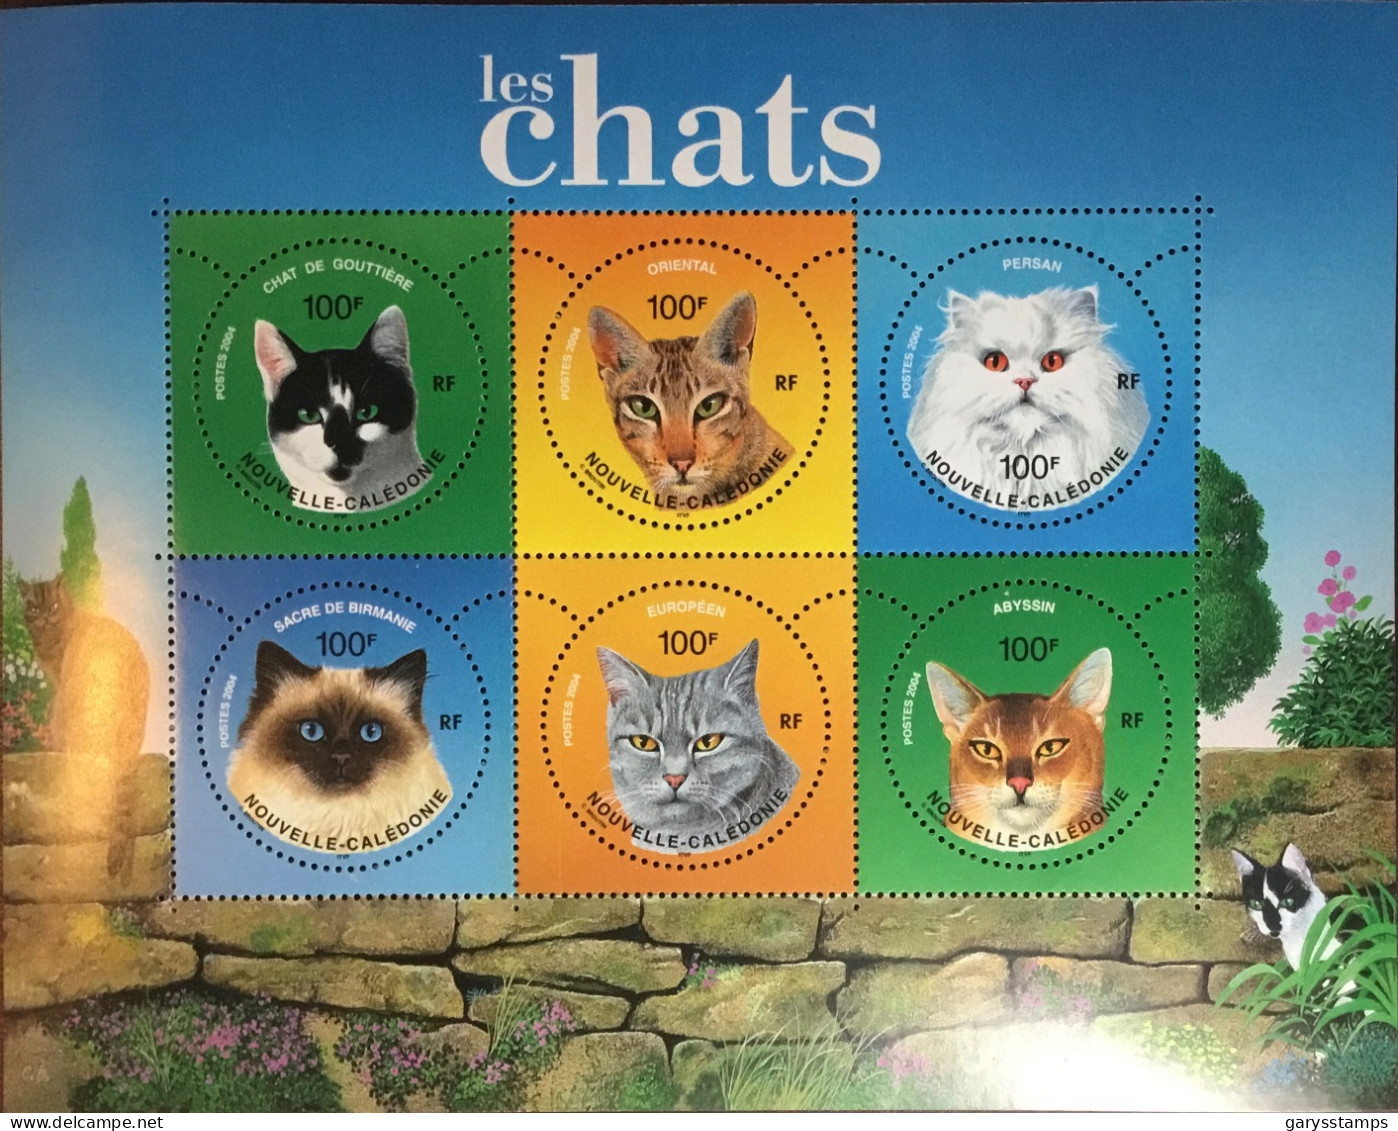 New Caledonia Caledonie 2004 Cats Animals Sheetlet MNH - Domestic Cats